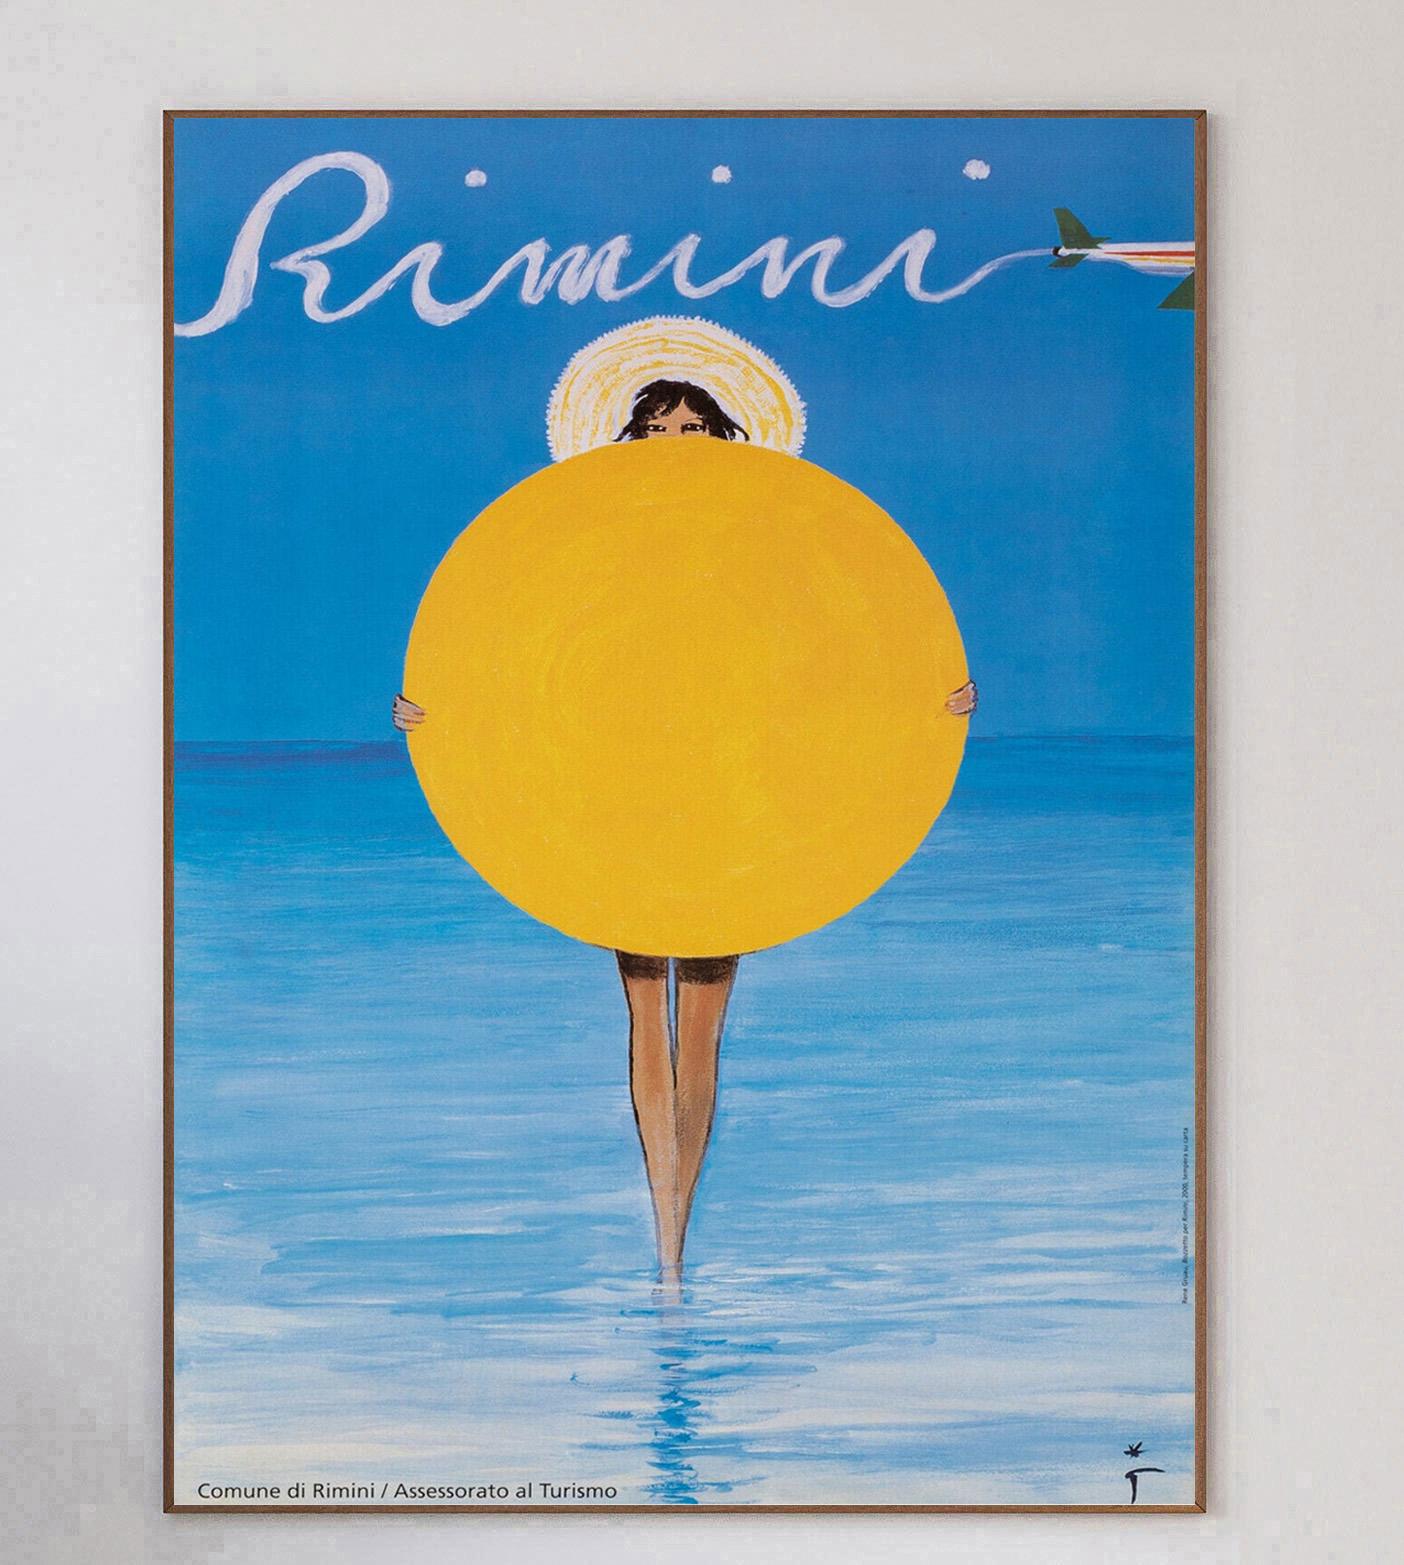 Designed by the iconic poster artist Rene Gruau, this poster was created in 2000 to promote the Italian city of Rimini. The beautiful seaside resort city in northern Italy is ever popular with tourists and this wonderful design shows why.

Depicting